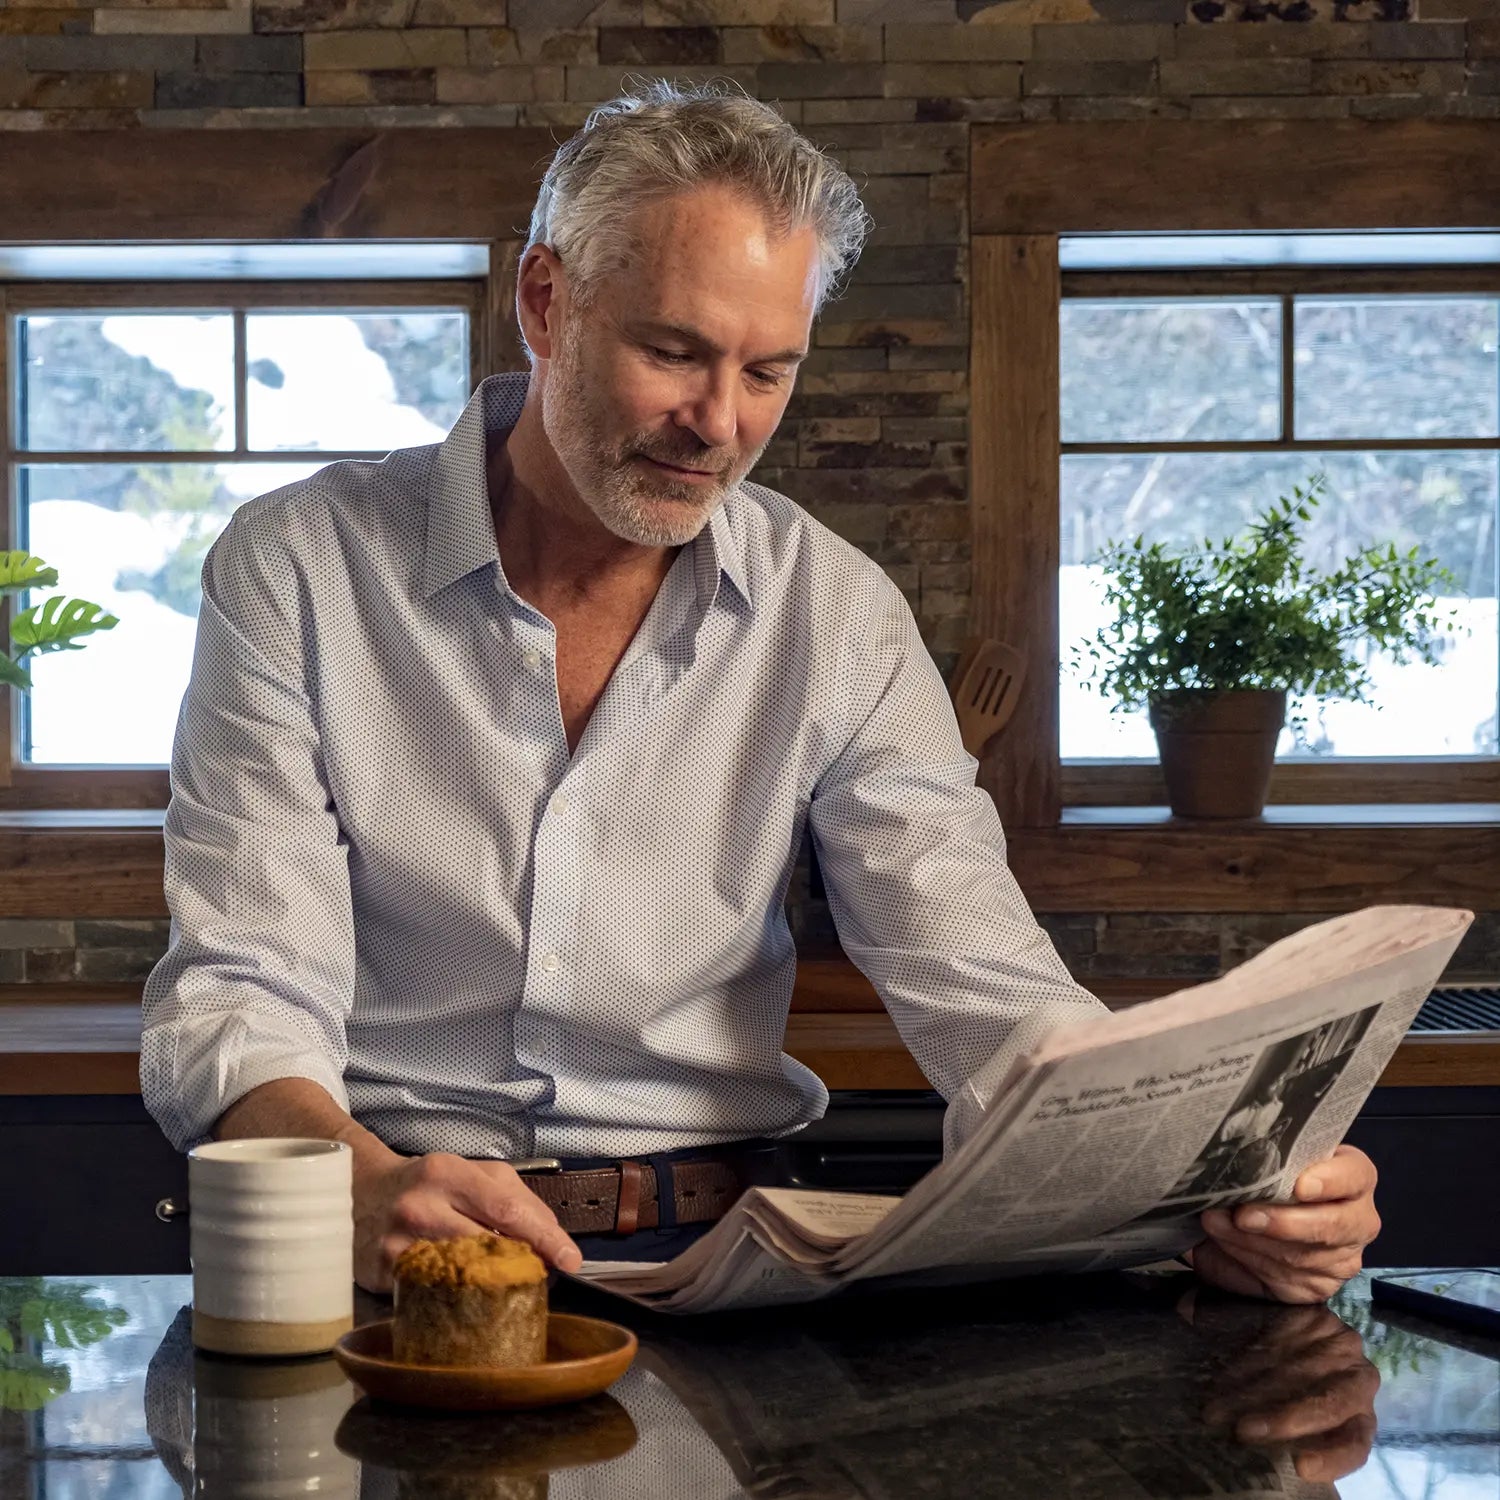 Male model sitting in the kitchen, reading the newspaper with a cup of coffee